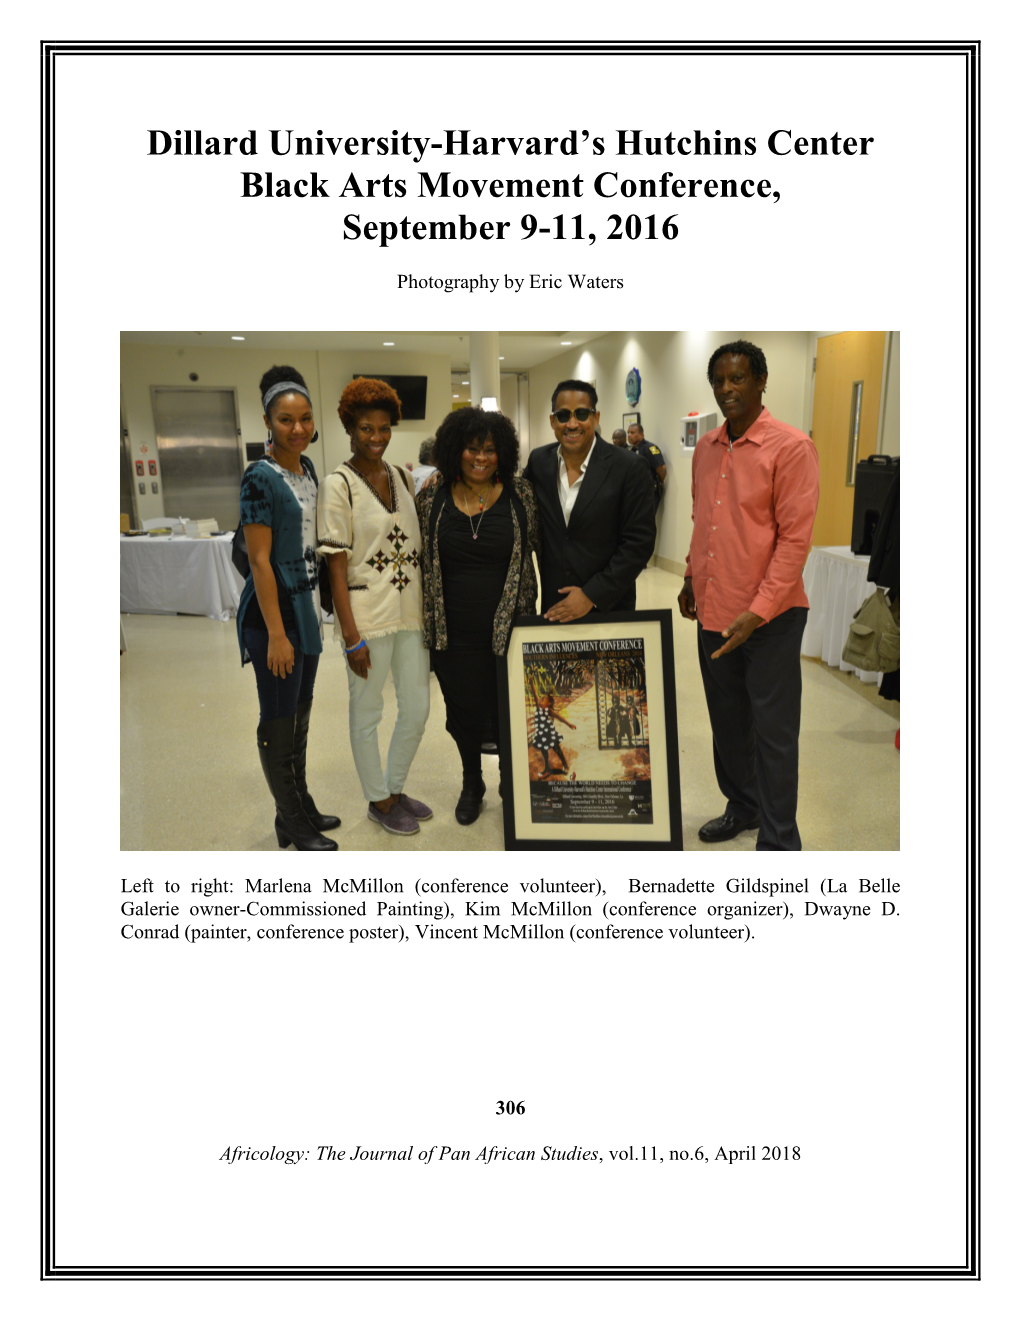 View of the Black Arts Movement (Roundtable)